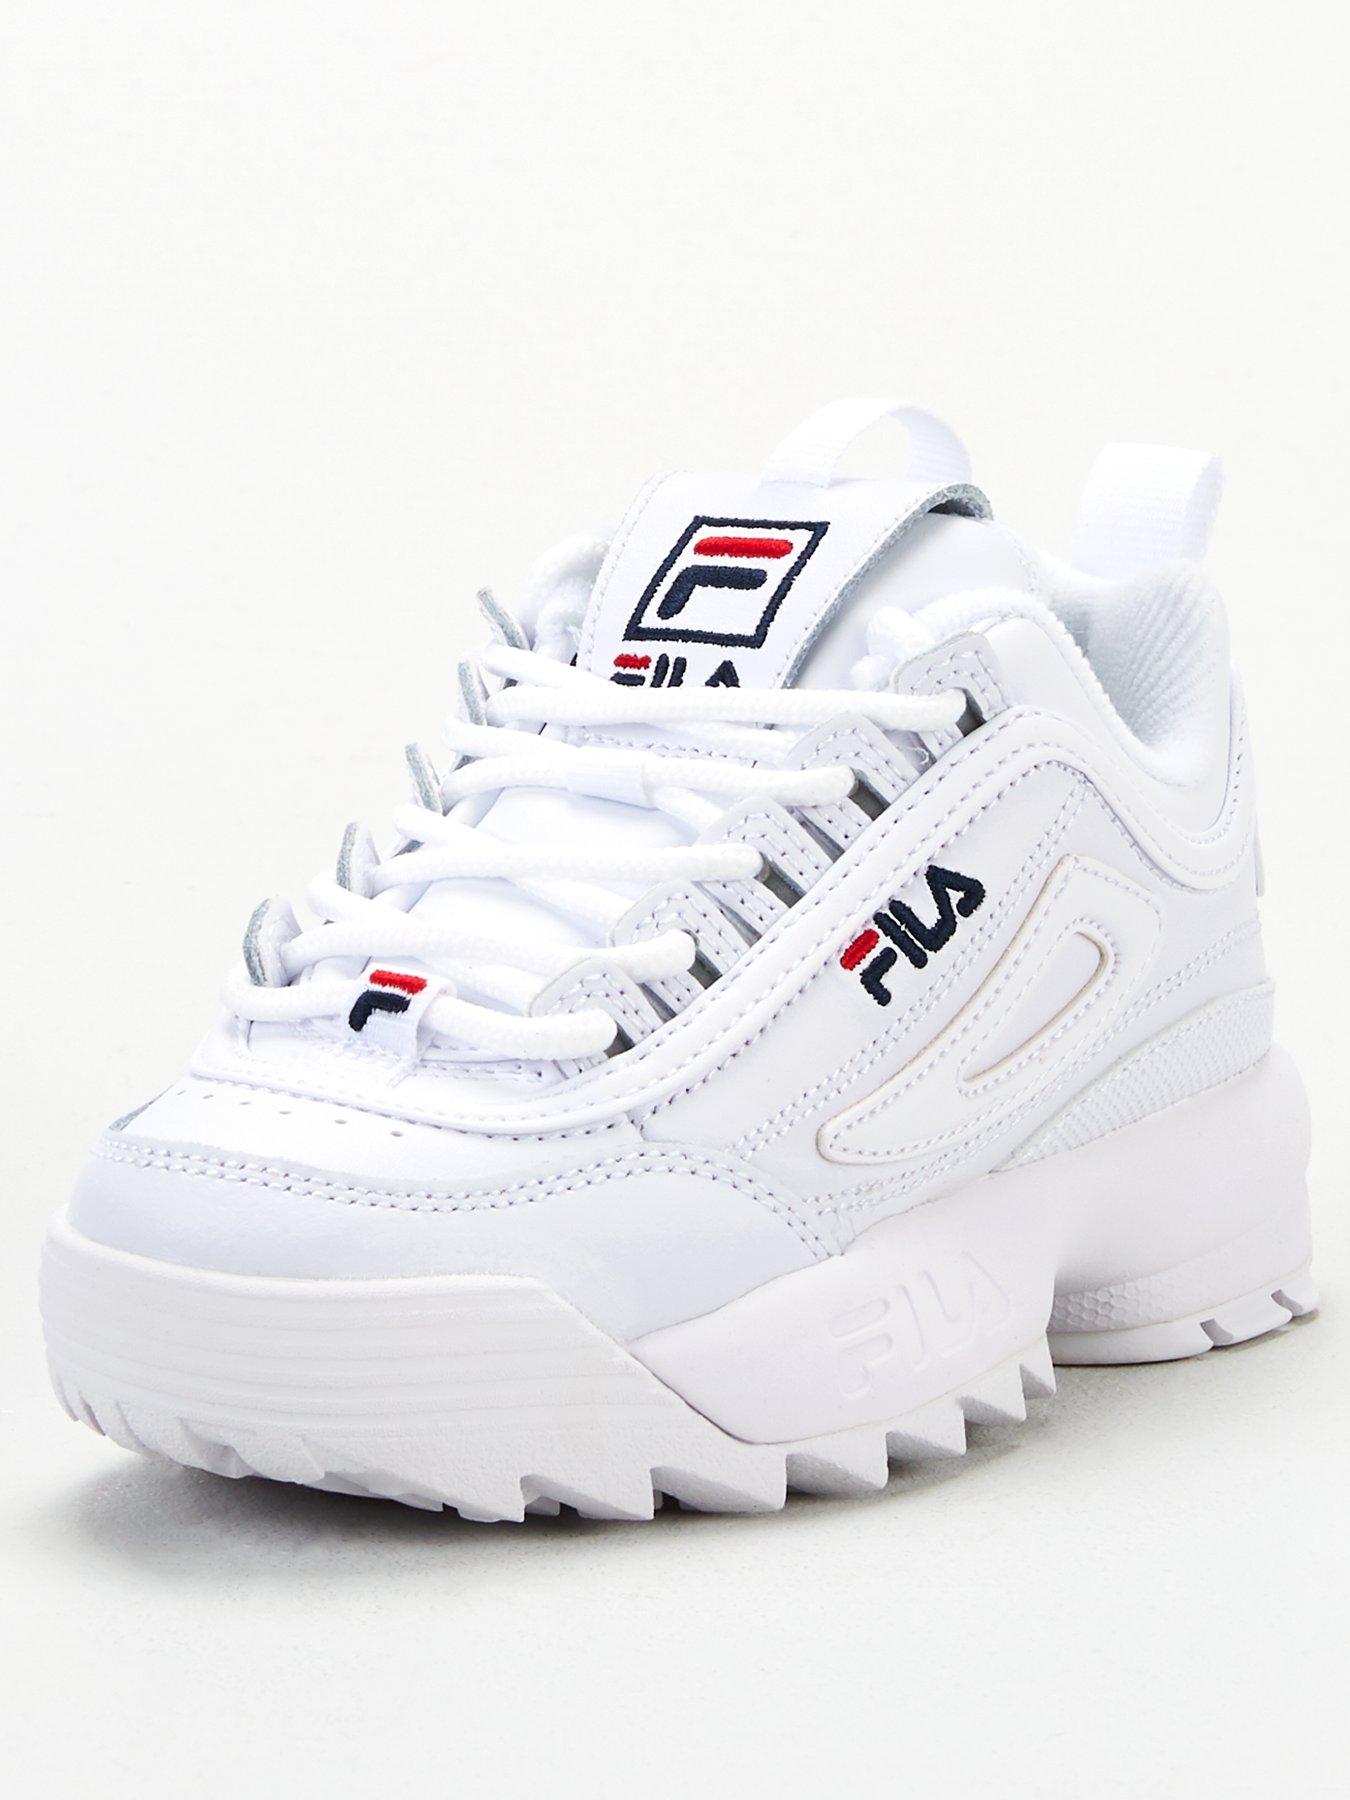 fila trainers for girls